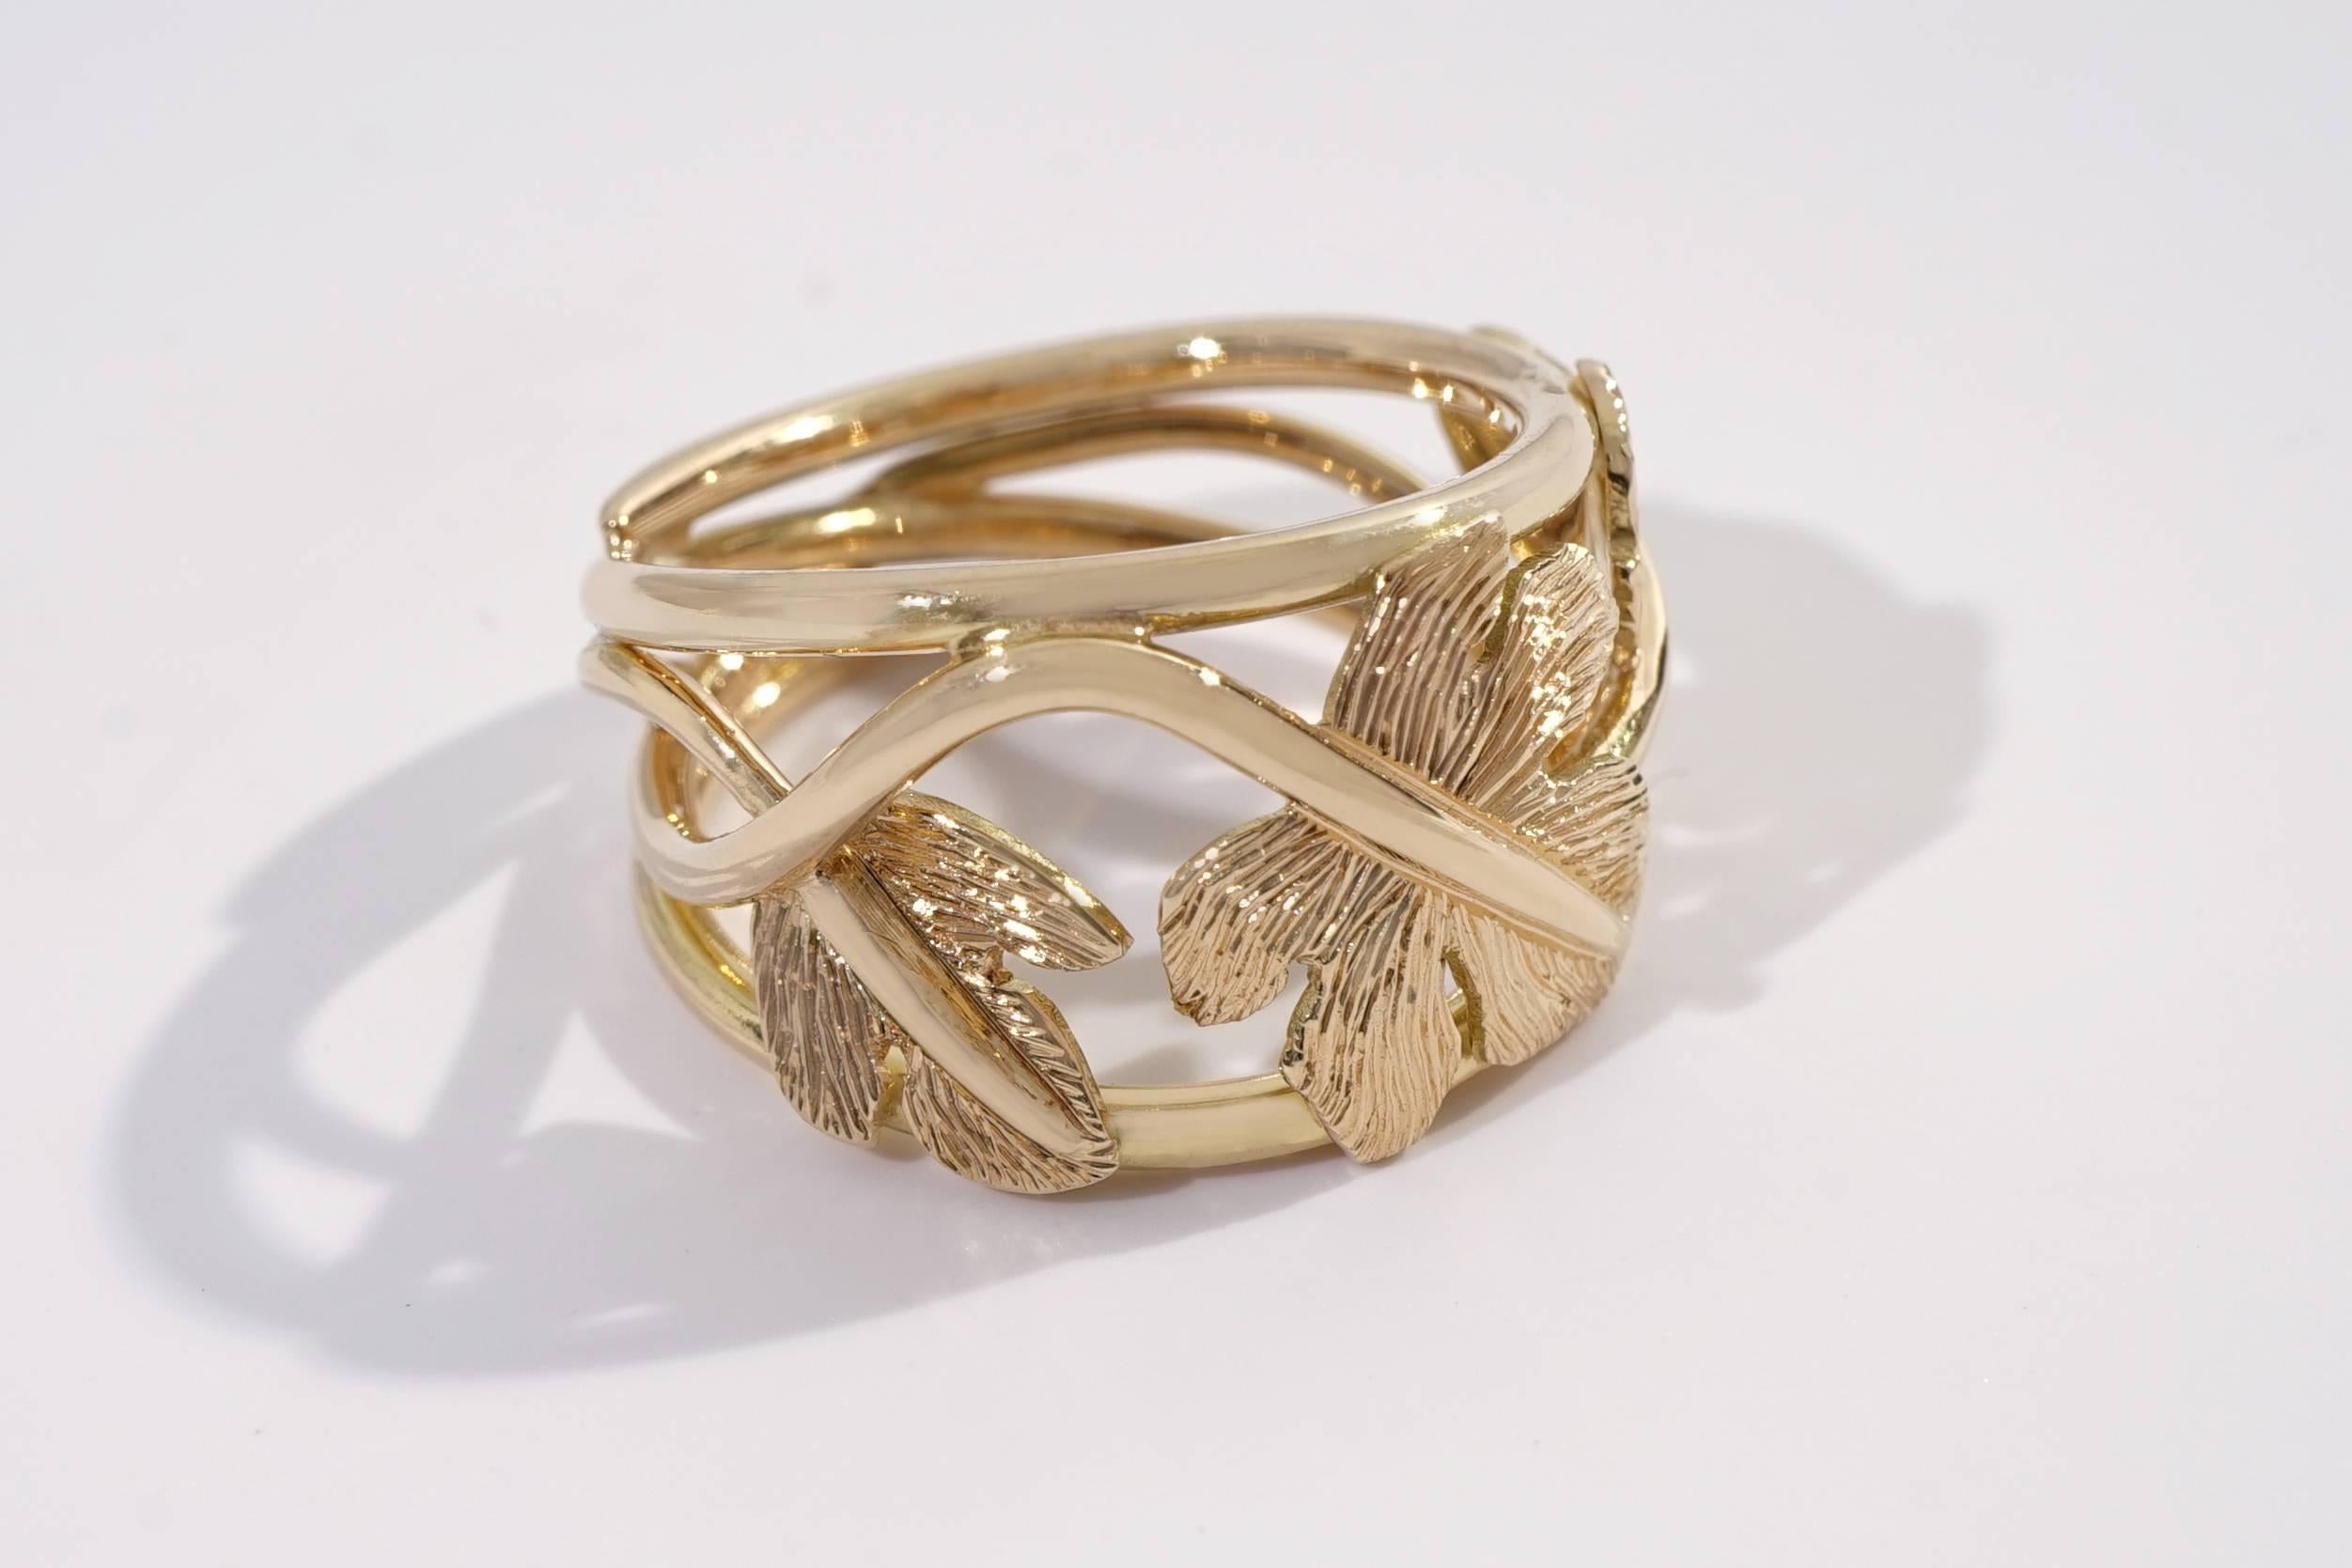 Contemporary Coralie Van Caloen 18 Carat Gold Pinky Band Ring Hand Engraved Fig Leaves For Sale